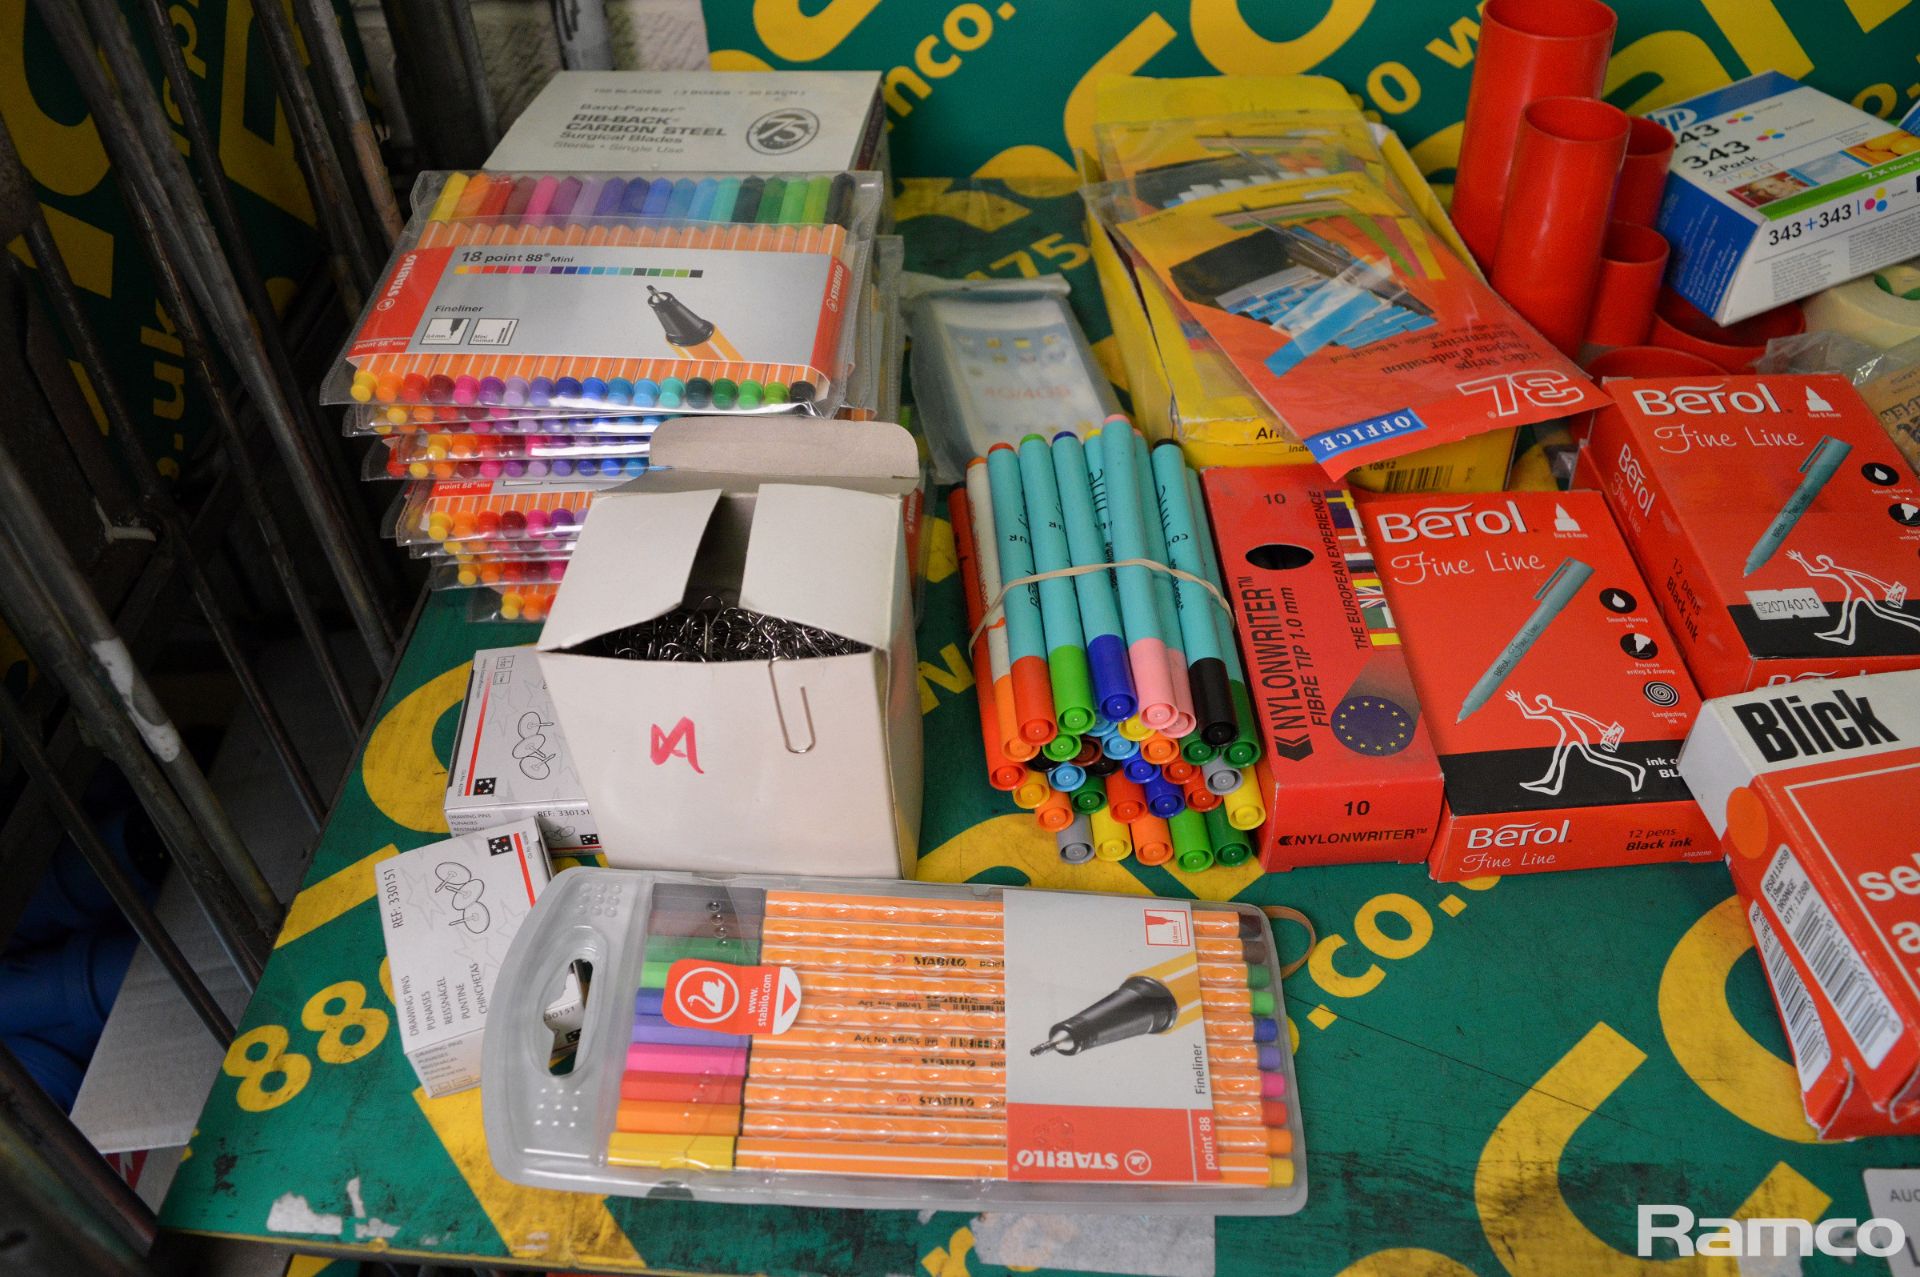 Various stationary - printer ink cartridges, pens, rubber bands, labels, telephone message and more - Image 2 of 4